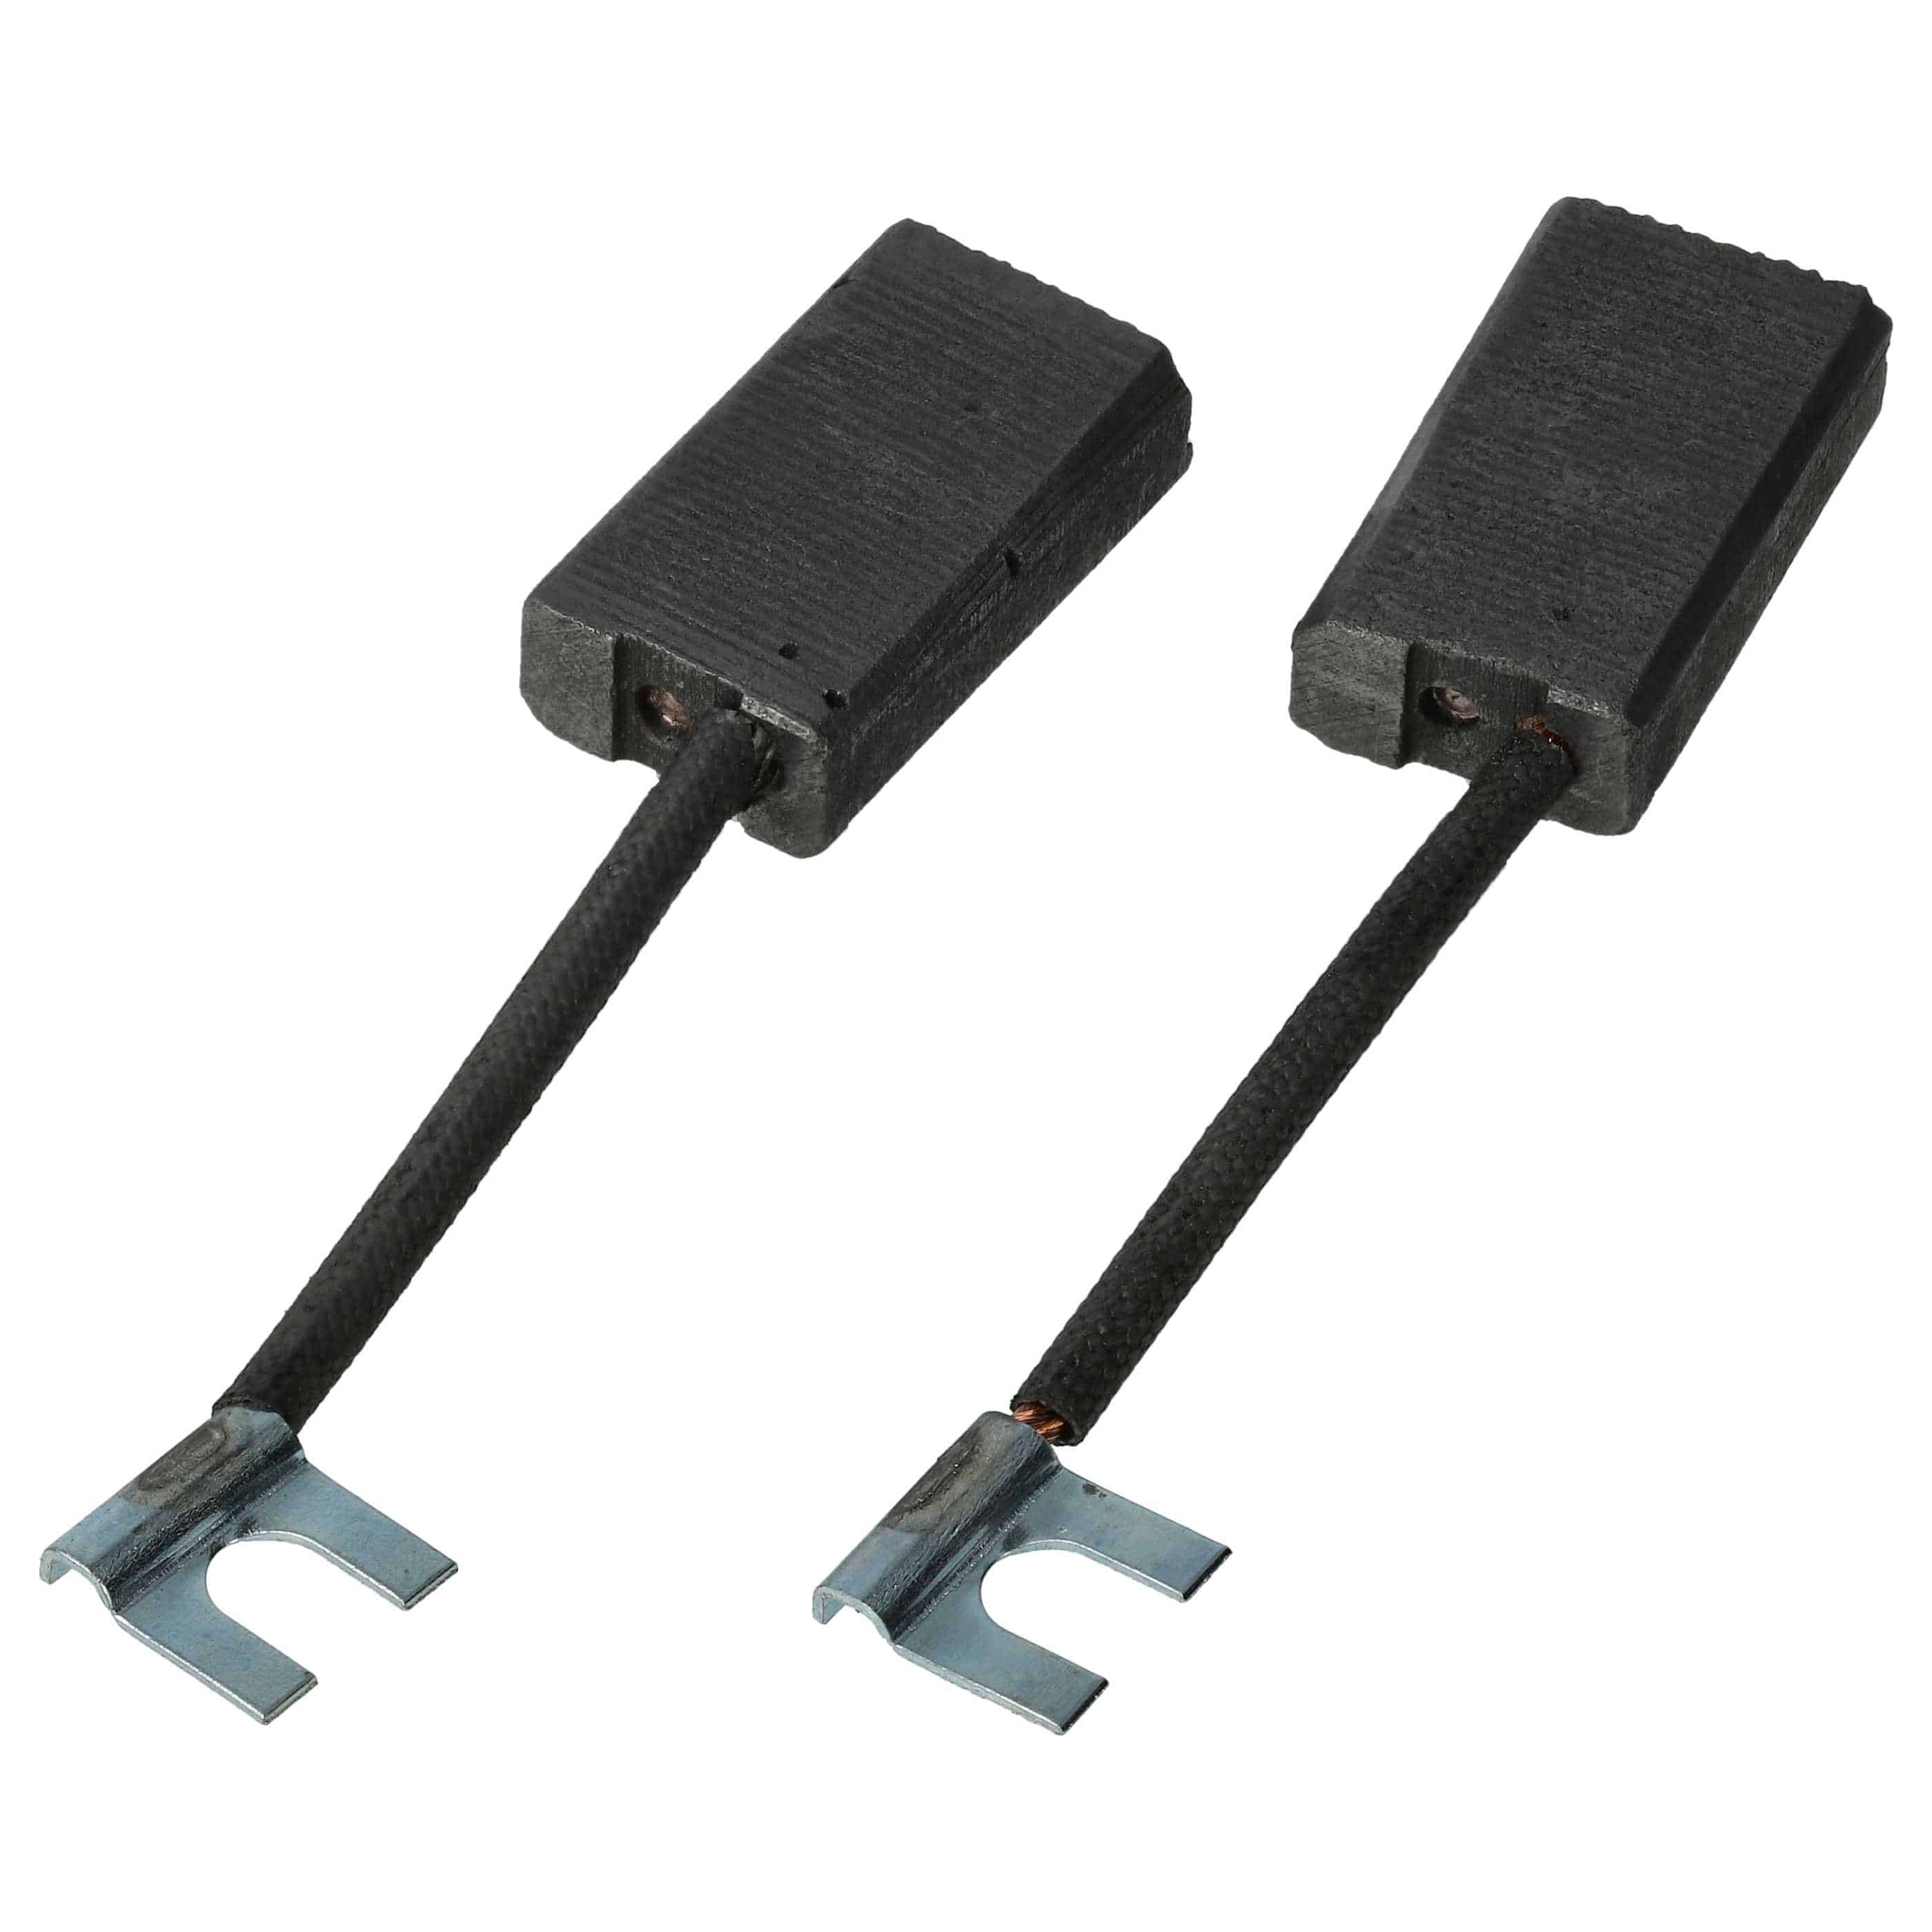 2x Carbon Brush as Replacement for Bosch 3607014012 Electric Power Tools